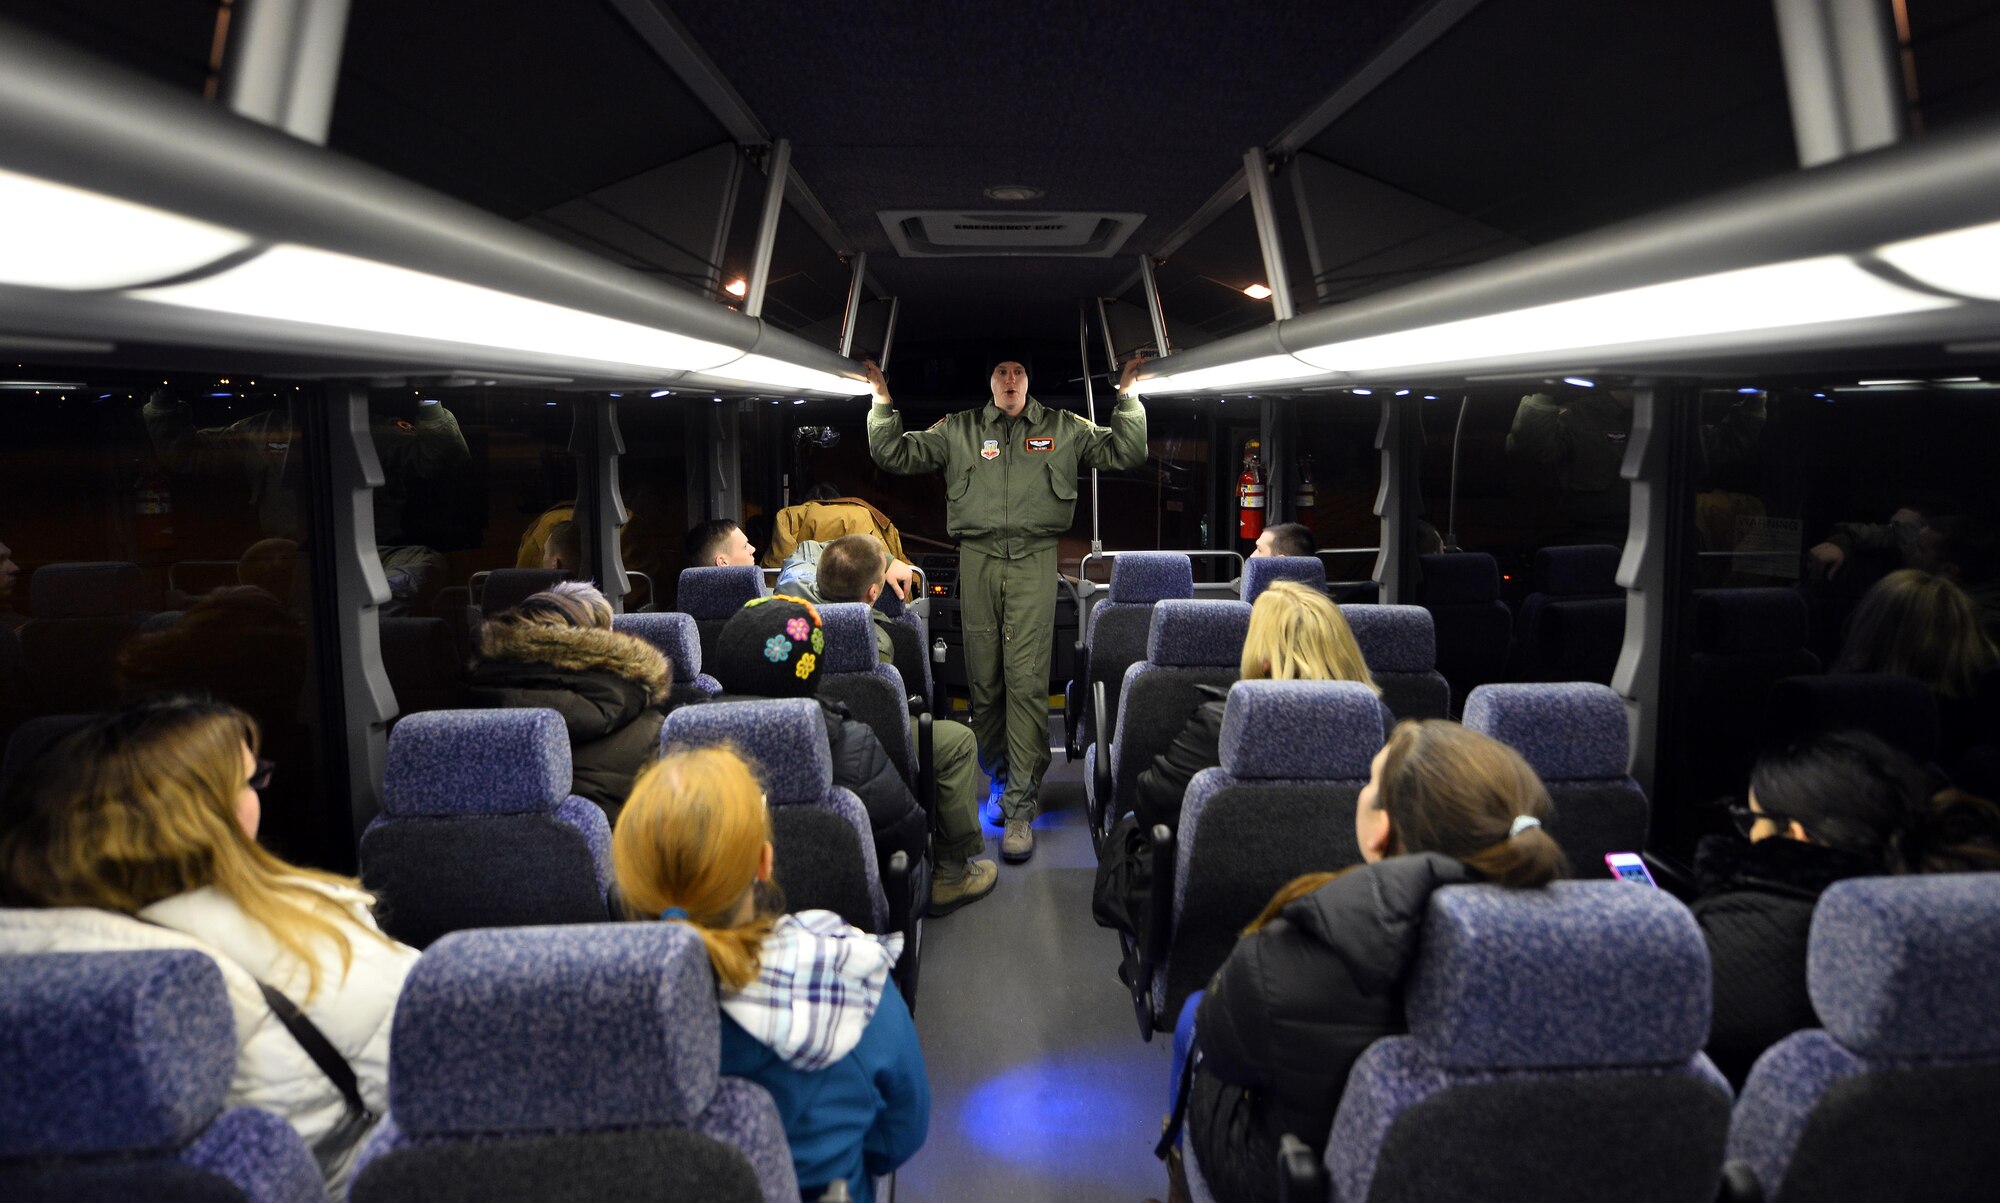 Capt. Tim Kenny, Chief of Central Flight Instructors Course with the 338th Combat Training Squadron, talks with military spouses prior to exiting a bus for a static tour of an RC-135 Aircraft parked in a hangar of the Bennie Davis Maintenance Facility as part of Spouse Appreciation Night, Dec. 7, 2016, at Offutt Air Force Base, Neb. This was the first Wing Spouse Appreciation Night with future tours being scheduled. (U.S. Air Force photo by Josh Plueger)